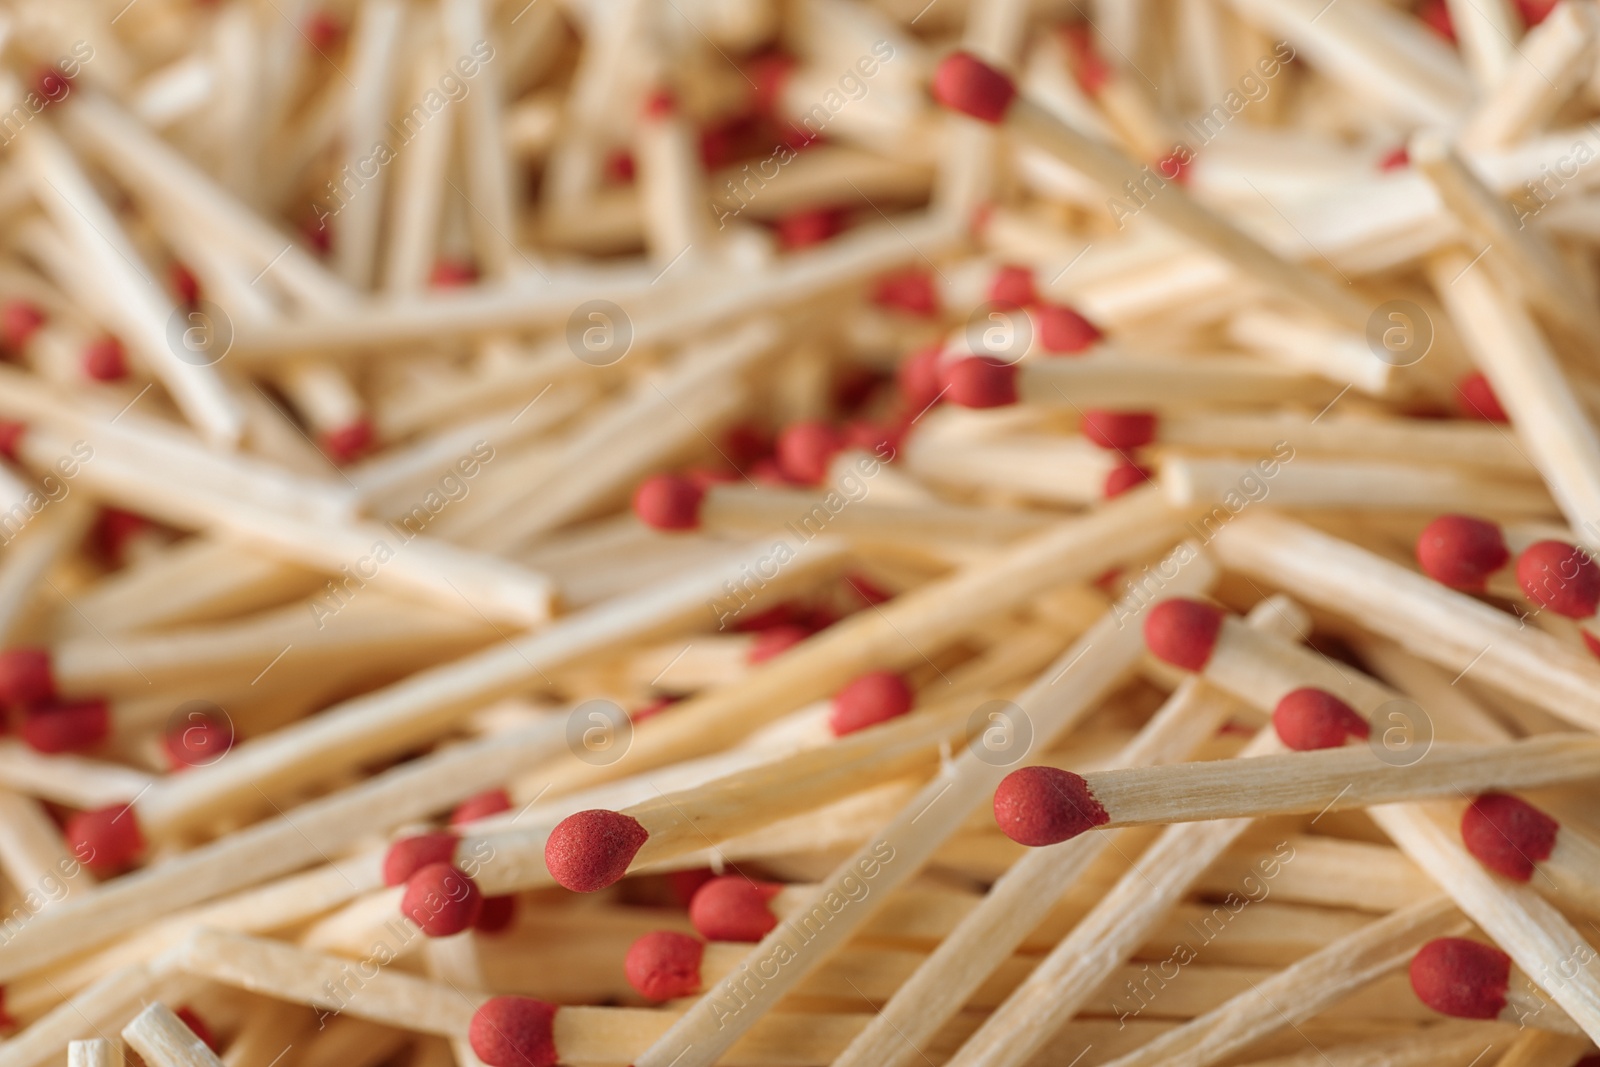 Photo of Pile of wooden matches as background, closeup